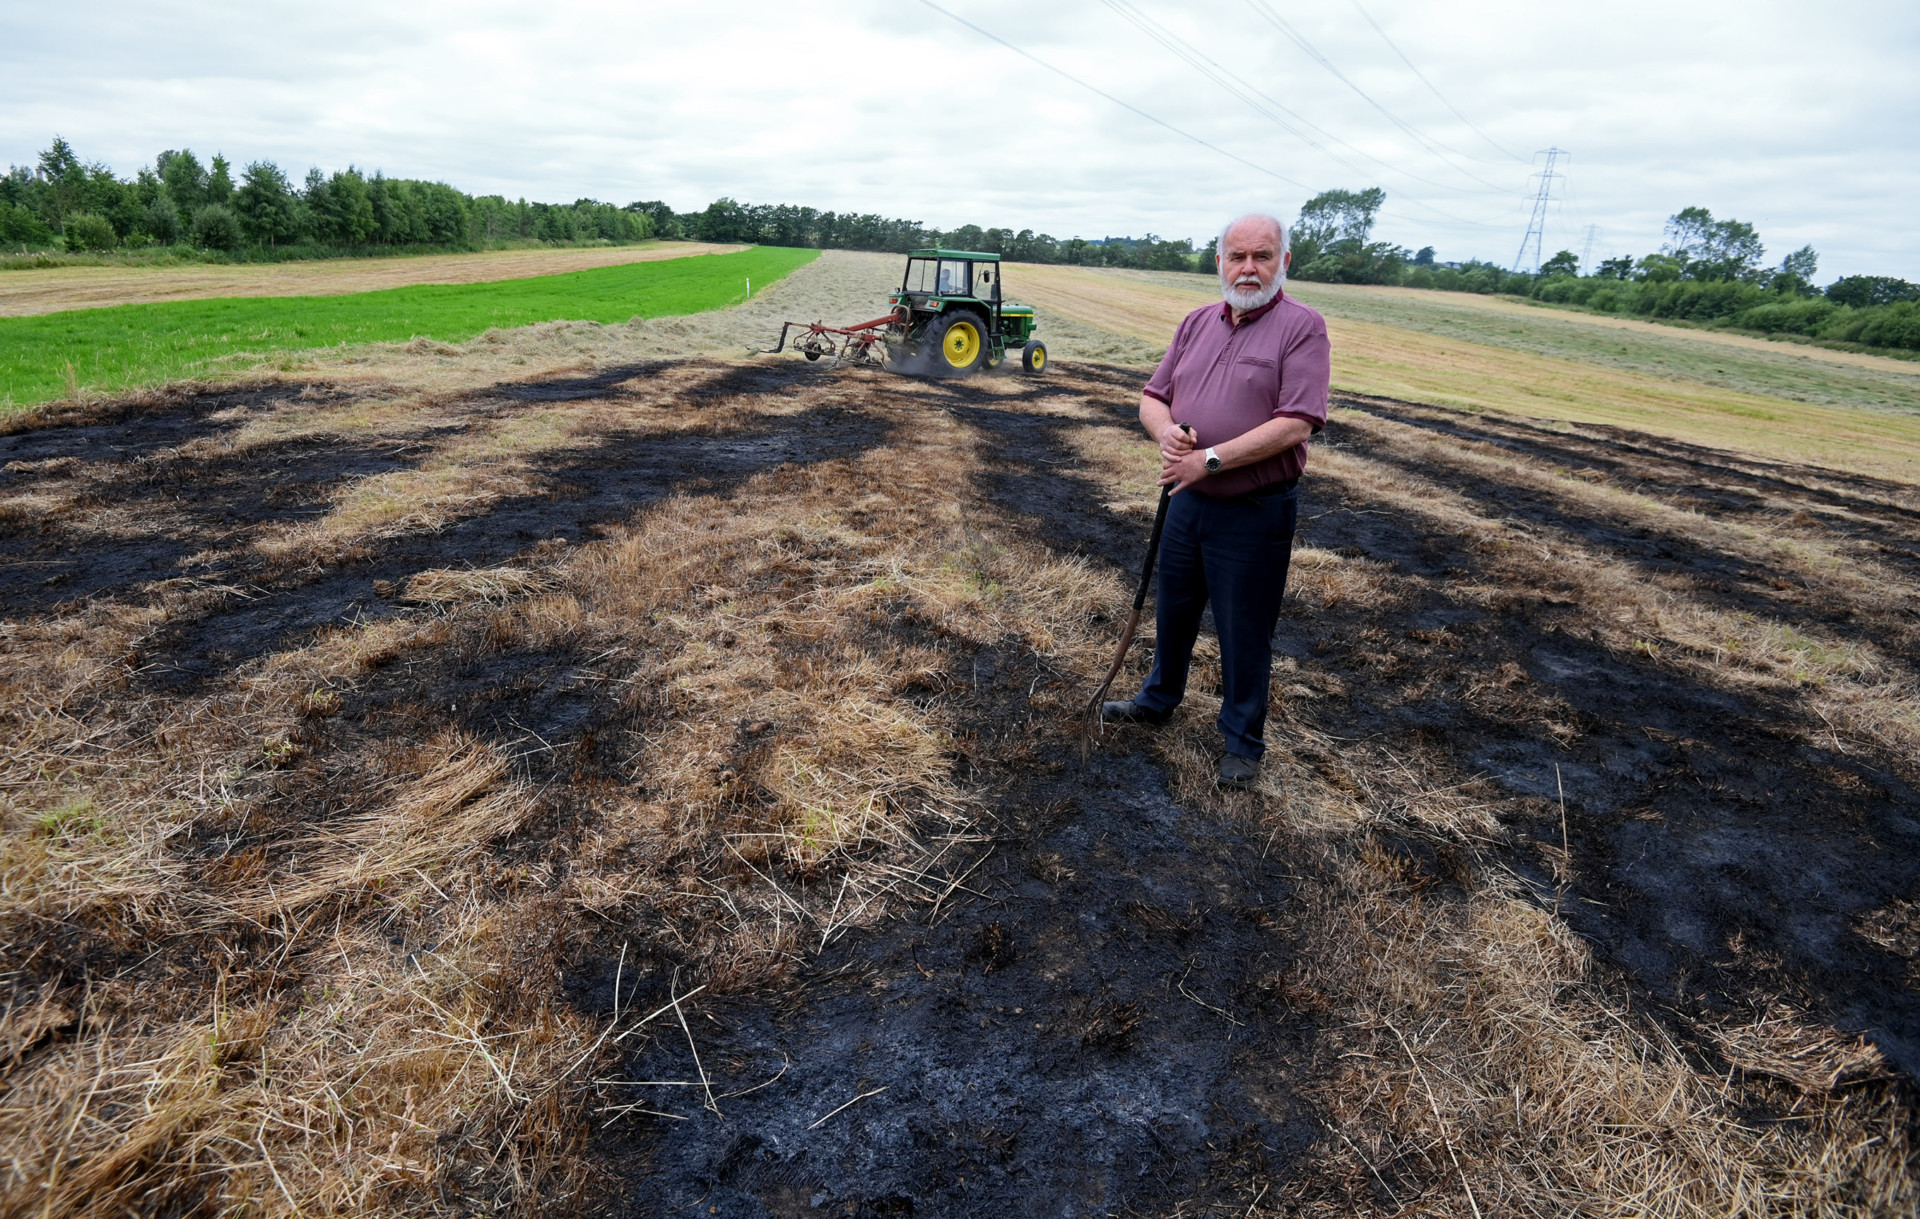 MP’s hay targeted in arson attack